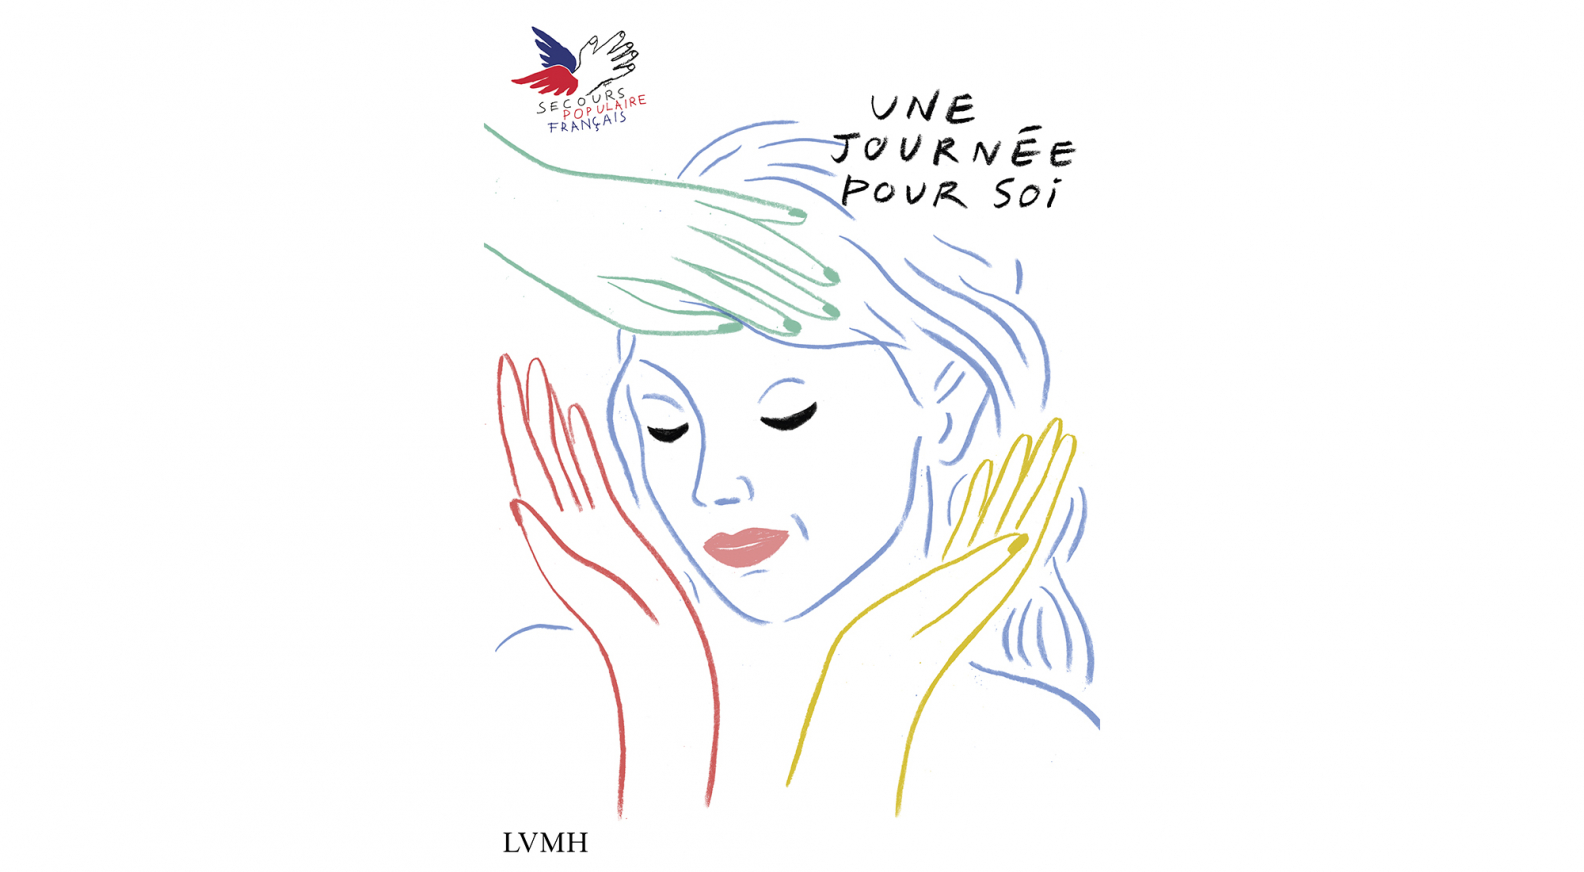 LVMH partners with Secours populaire to launch “Une Journée Pour Soi” ( “A  Day All Your Own”) initiative to support women in vulnerable situations in  six French cities - LVMH